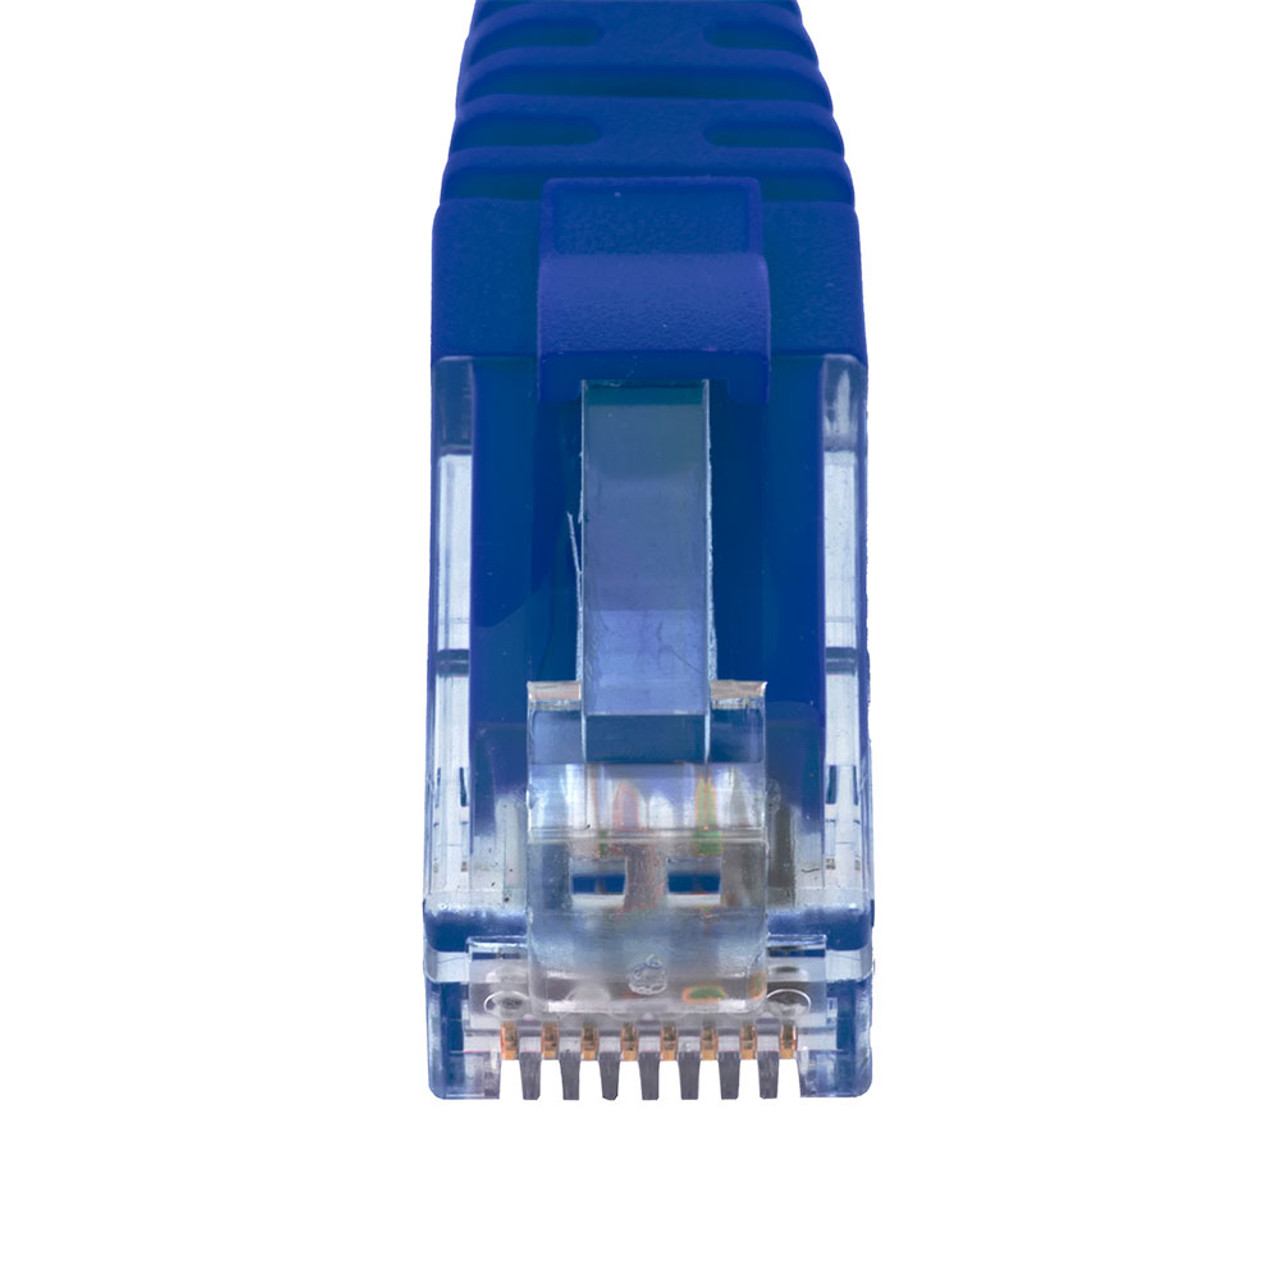 Ethernet Patch Cable CAT6A, UTP, 24AWG, 5 Ft,  10 pack, Blue